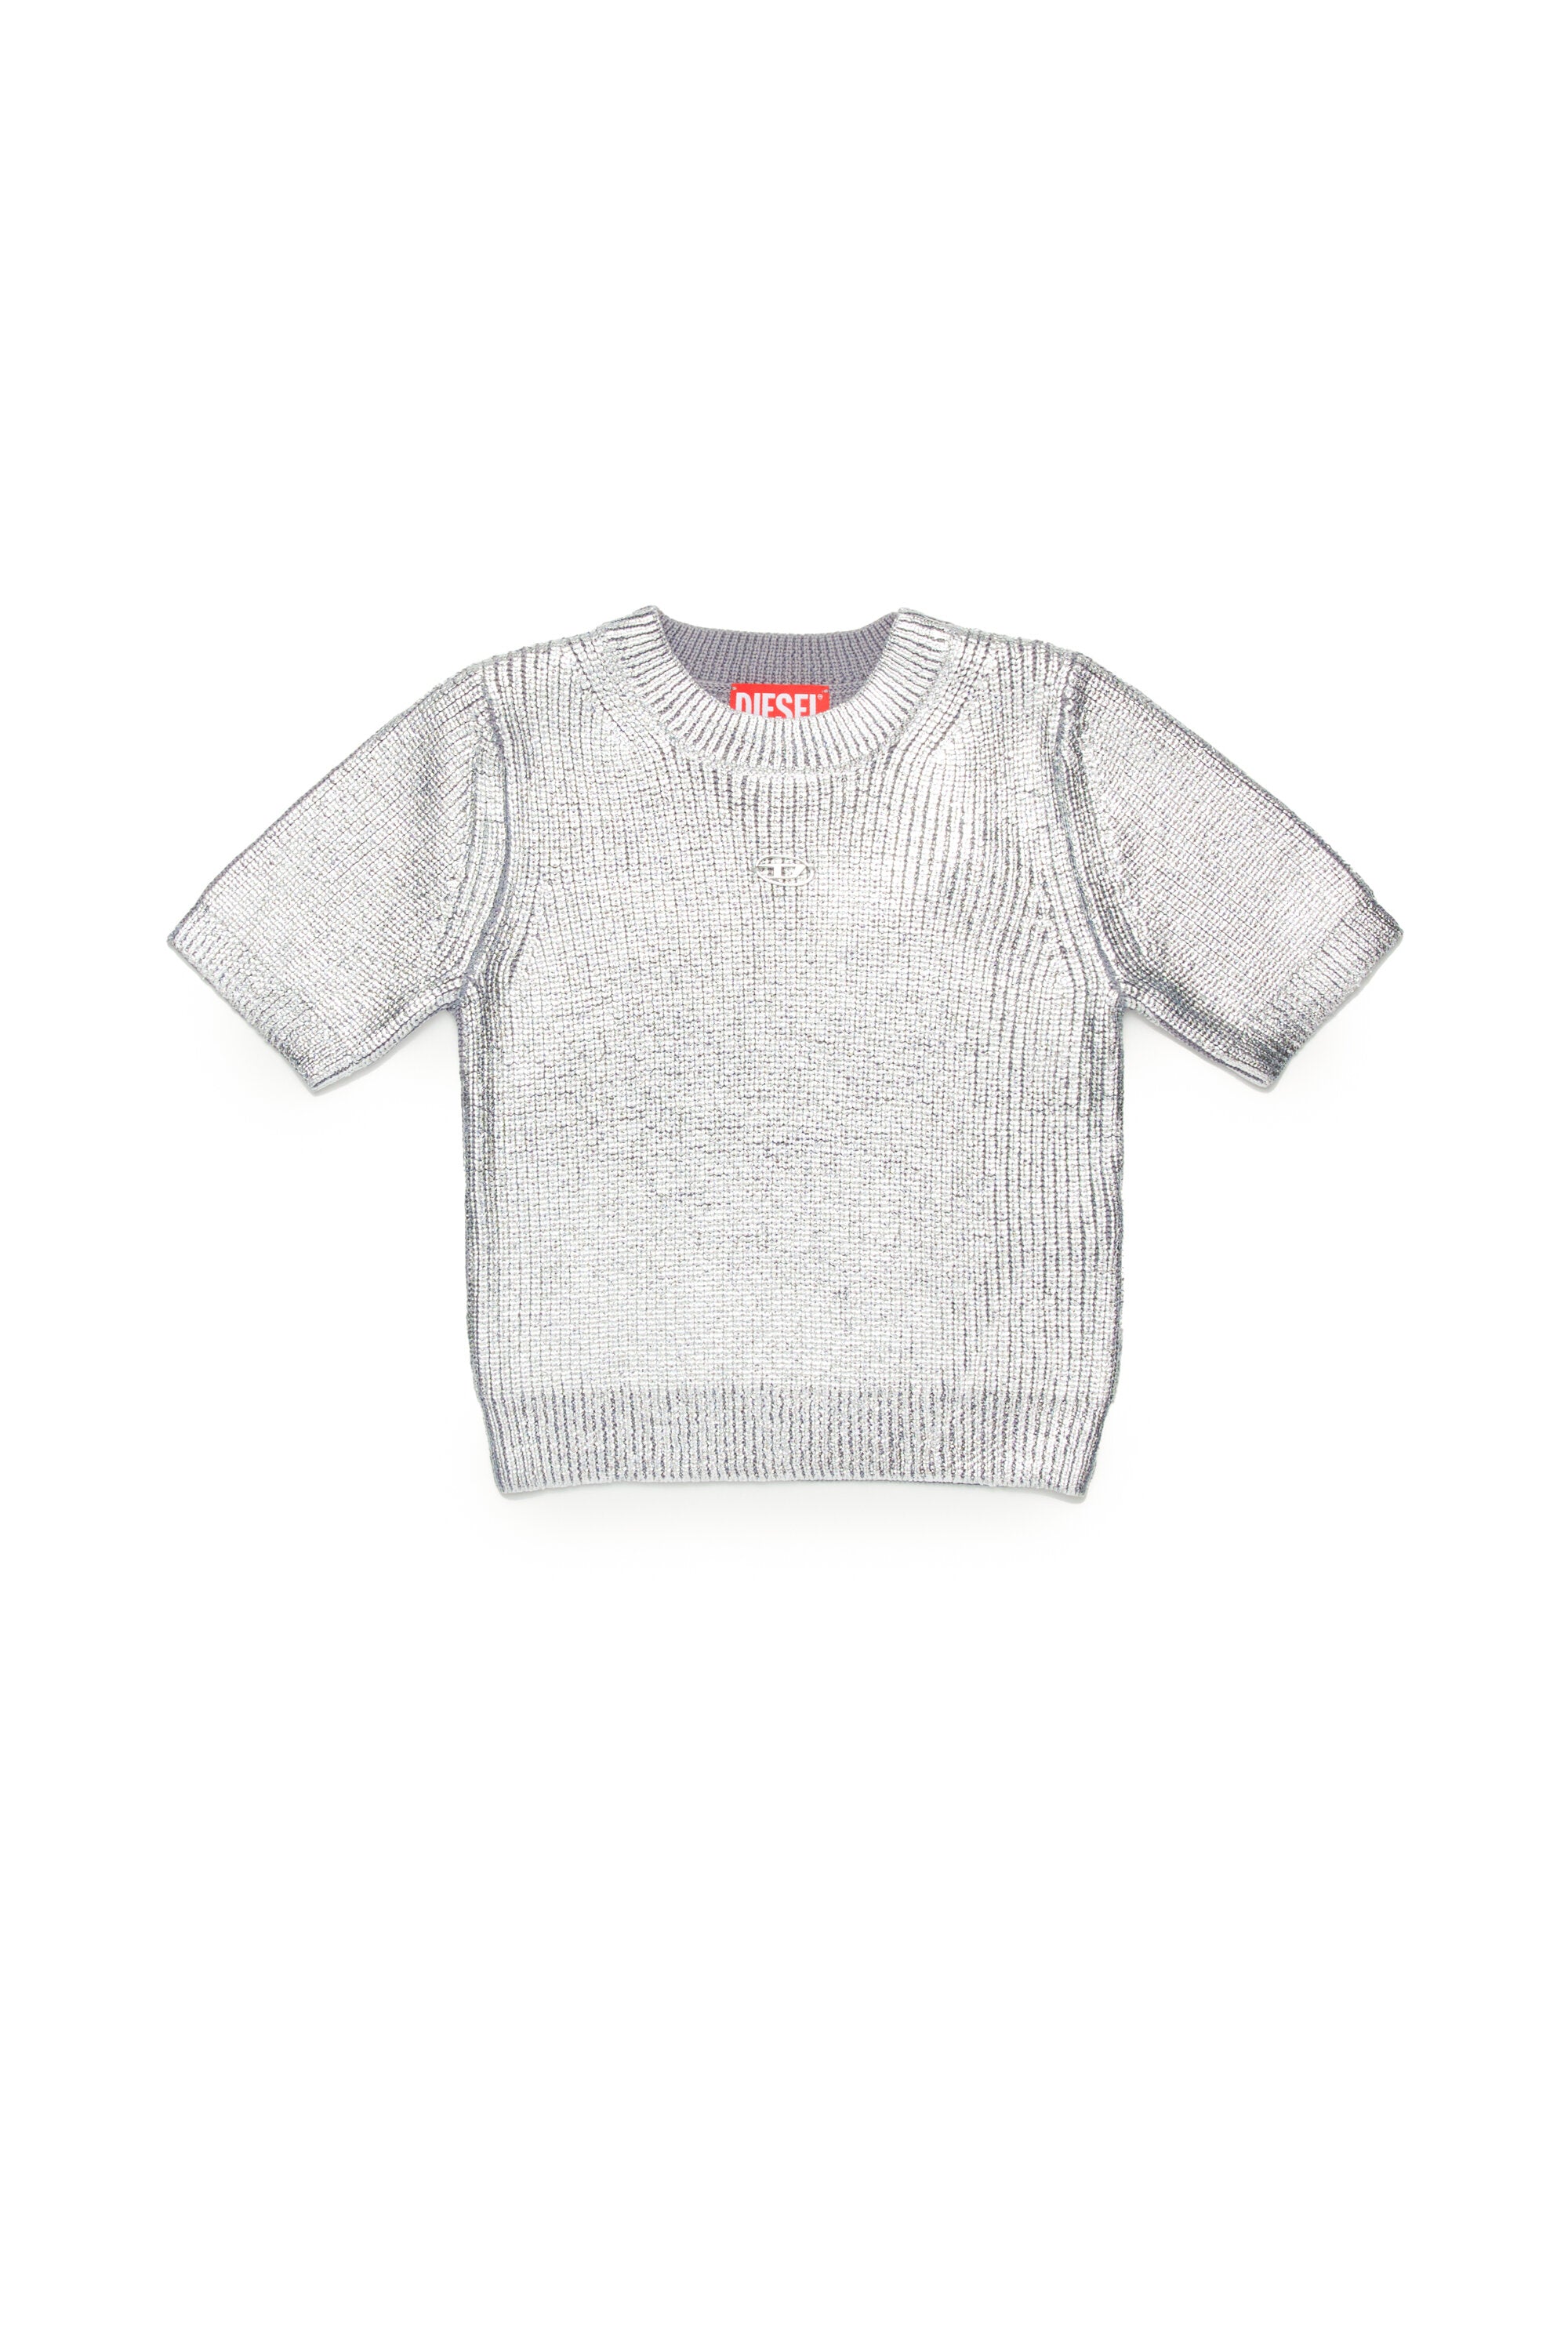 All-over silver mylar ribbed knitted top